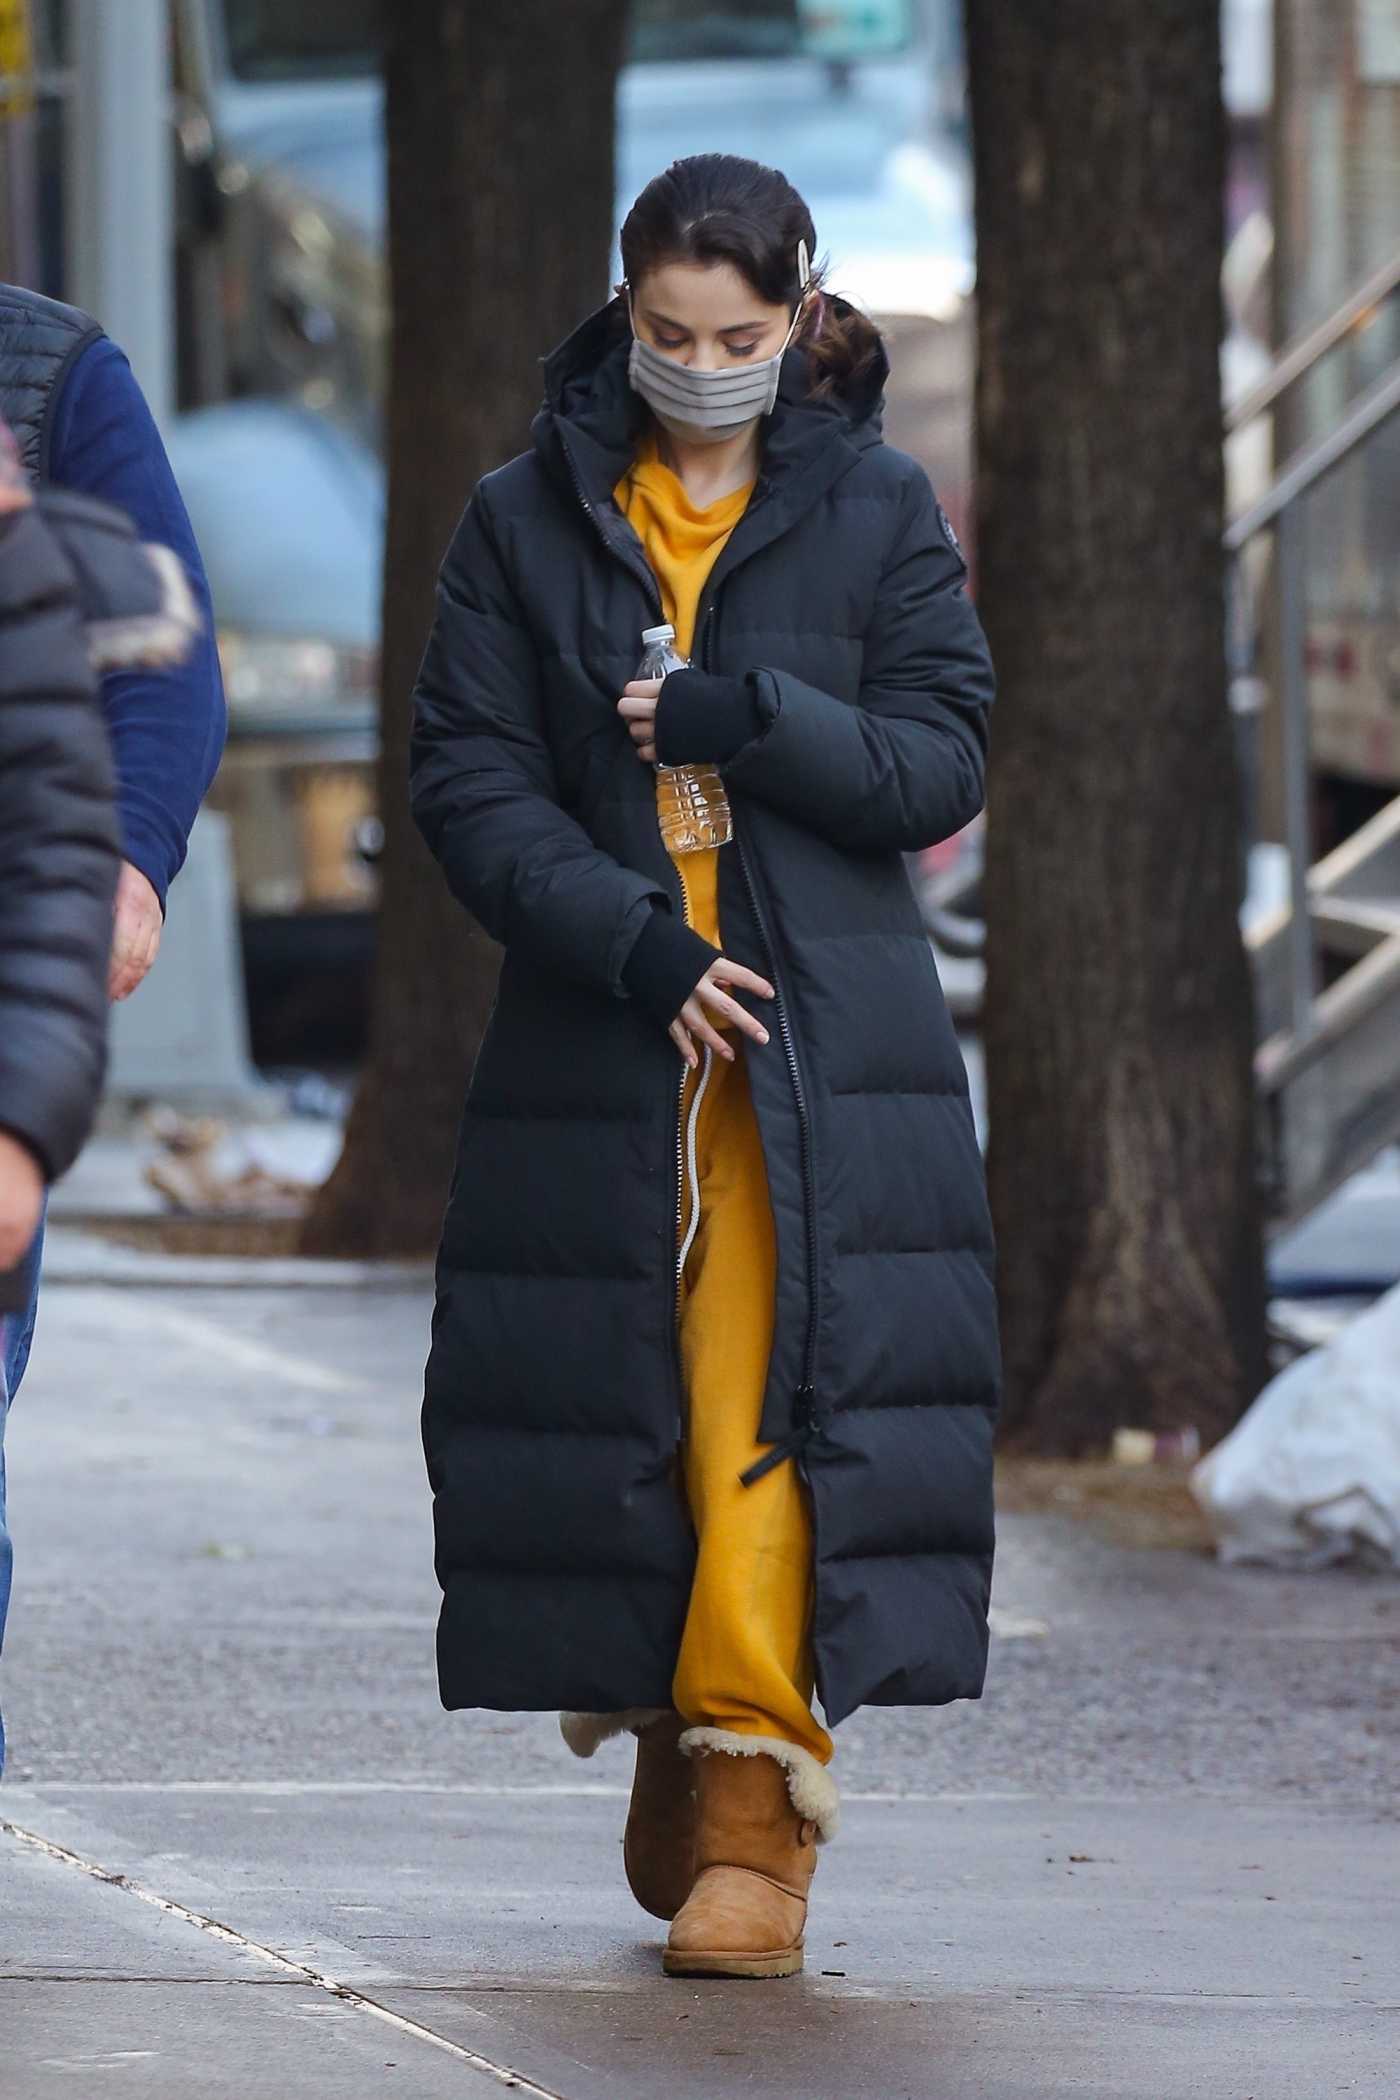 Selena Gomez in a Black Puffer Coat Was Spotted on the Set of Only Murders in the Building in New York 01/20/2021